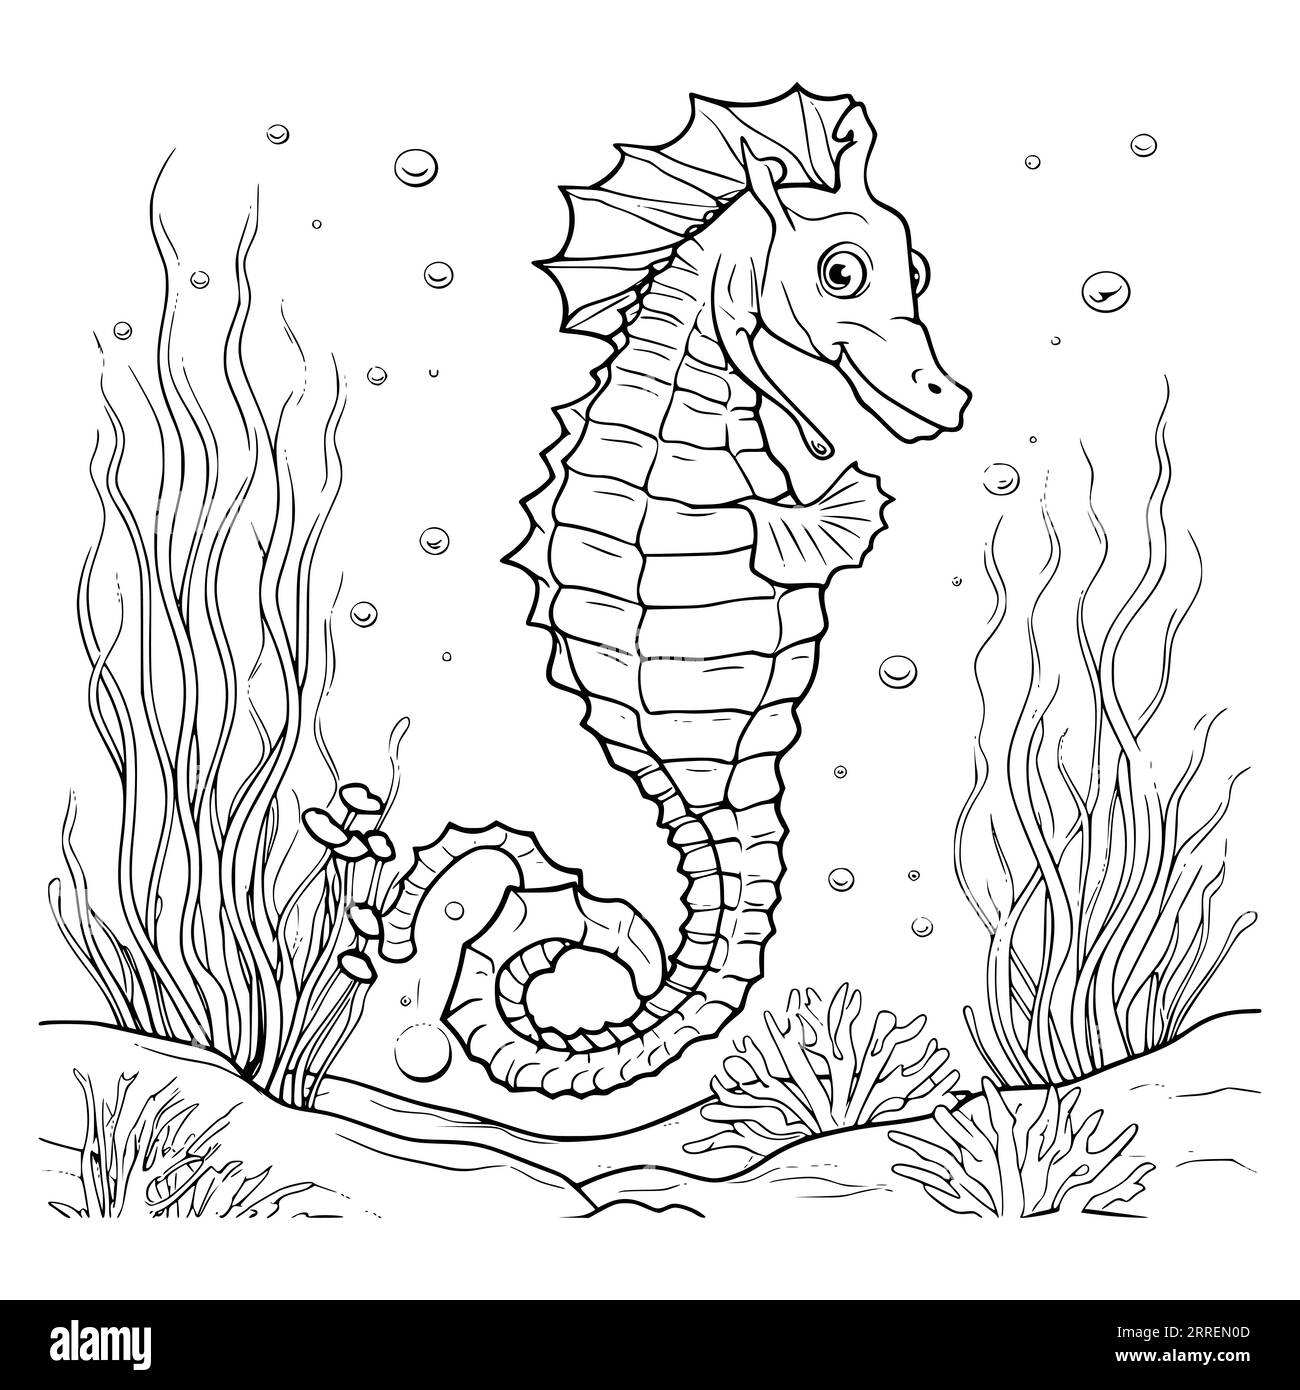 Beautiful Seahorse Coloring Page For Kids Stock Vector